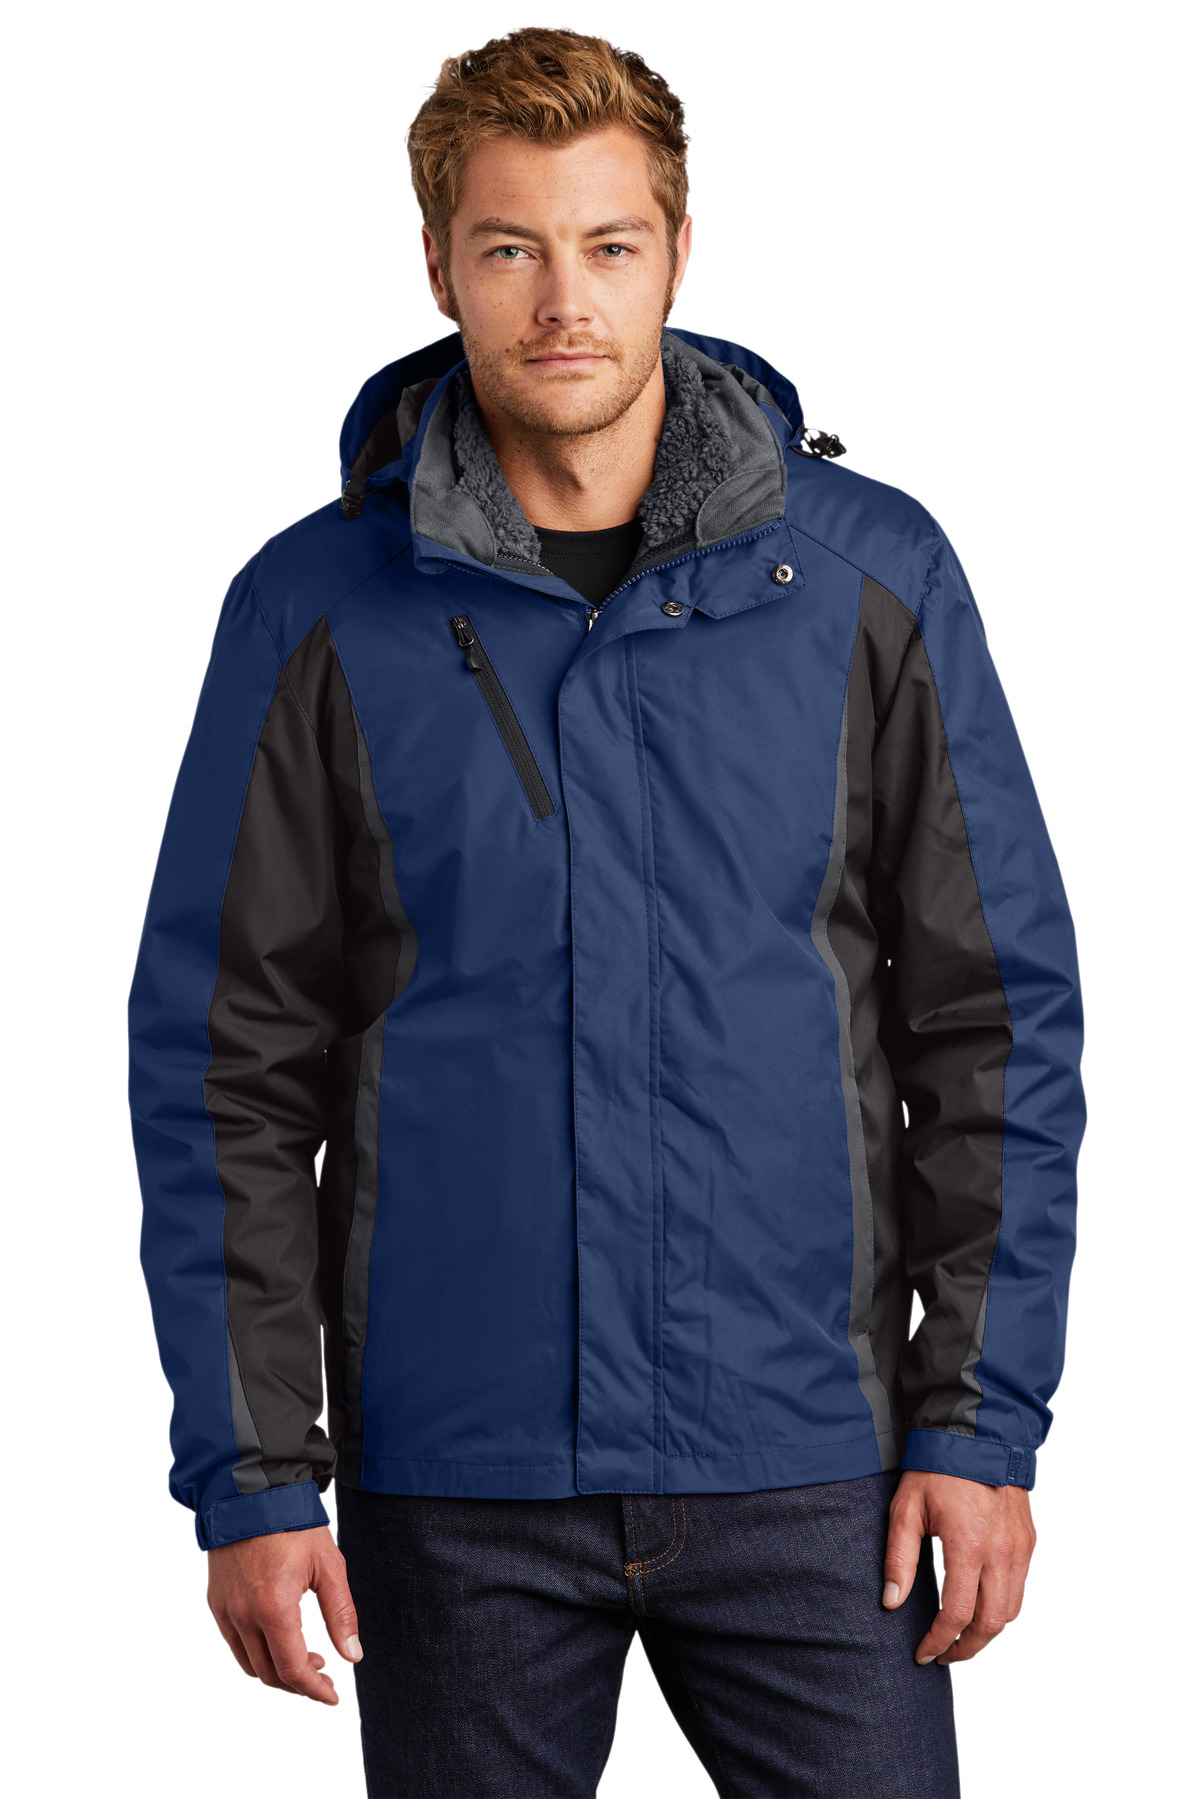 Port Authority Hospitality Outerwear ® Colorblock 3-in-1 Jacket.-Port Authority